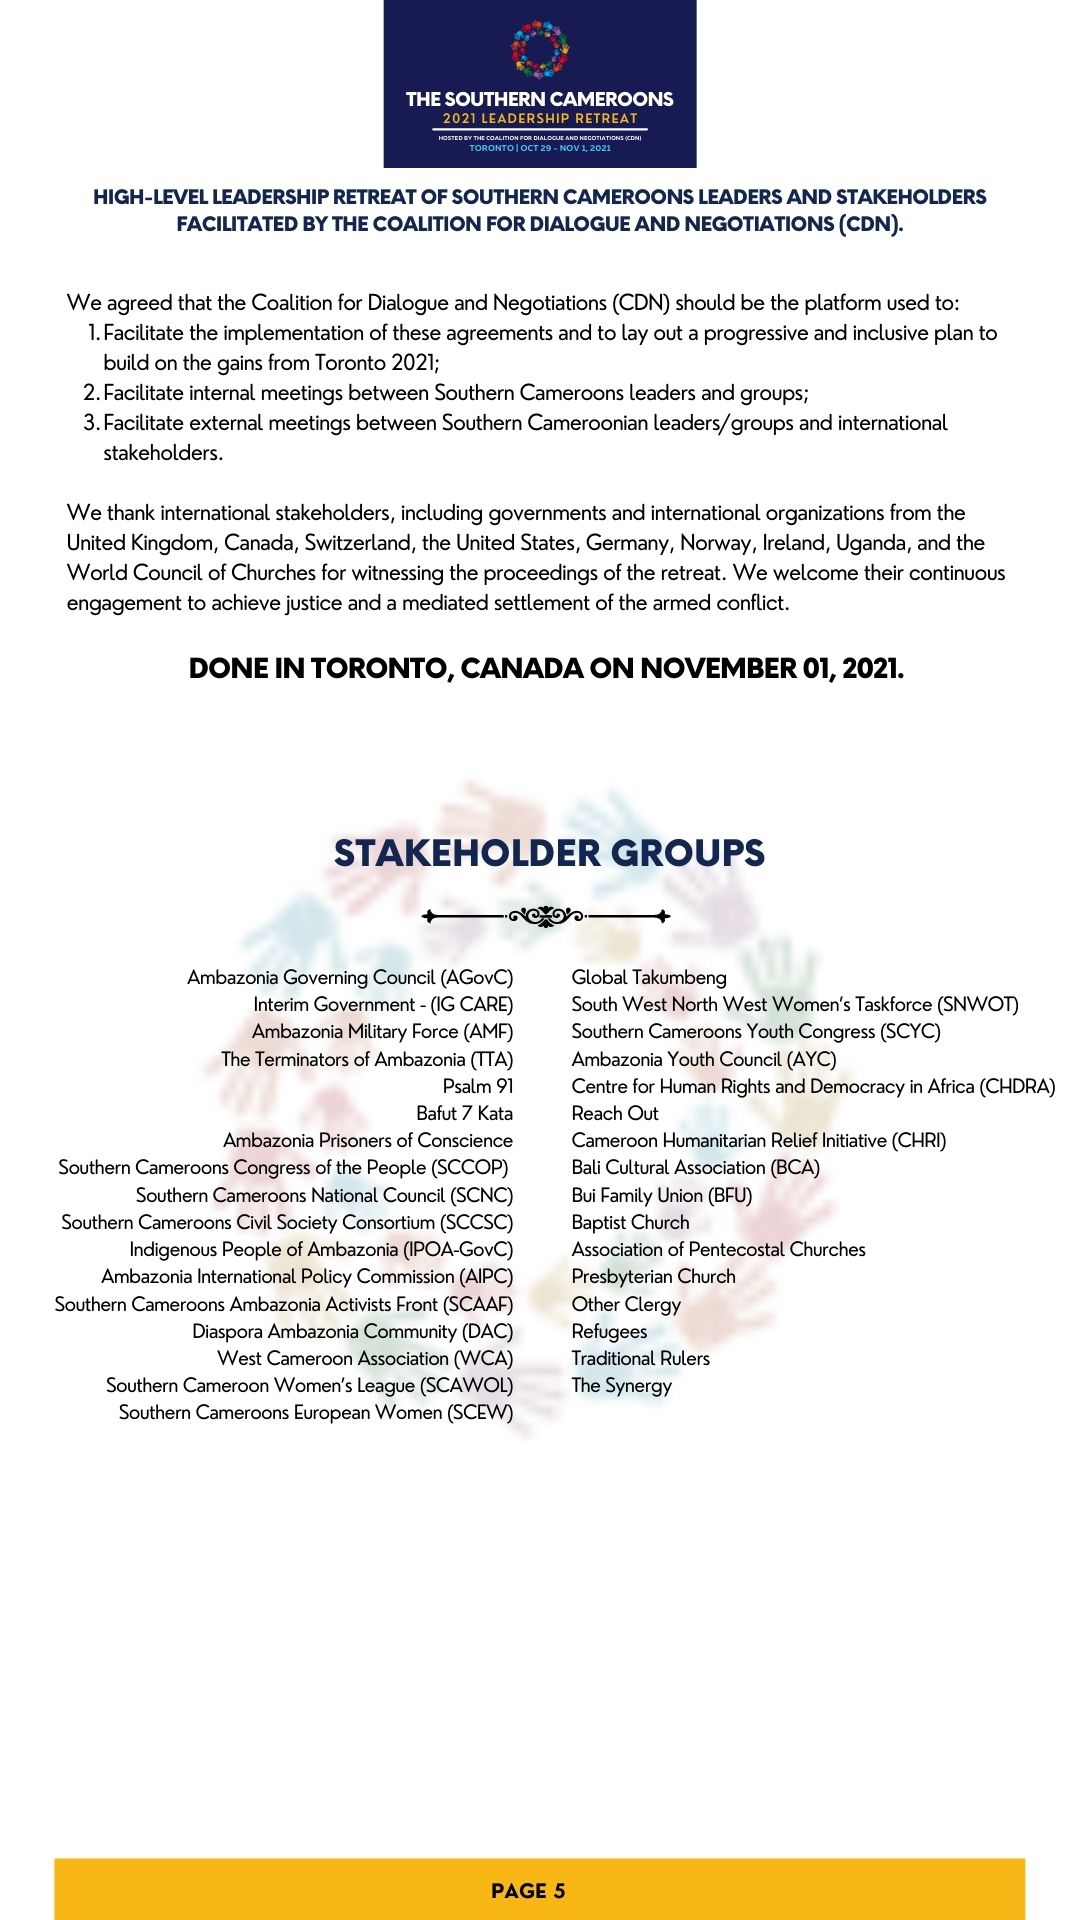 TORONTO DECLARATION from High-level Leadership Retreat of Southern Cameroons leaders and stakeholders facilitated by the Coalition for Dialogue and Negotiations (CDN).